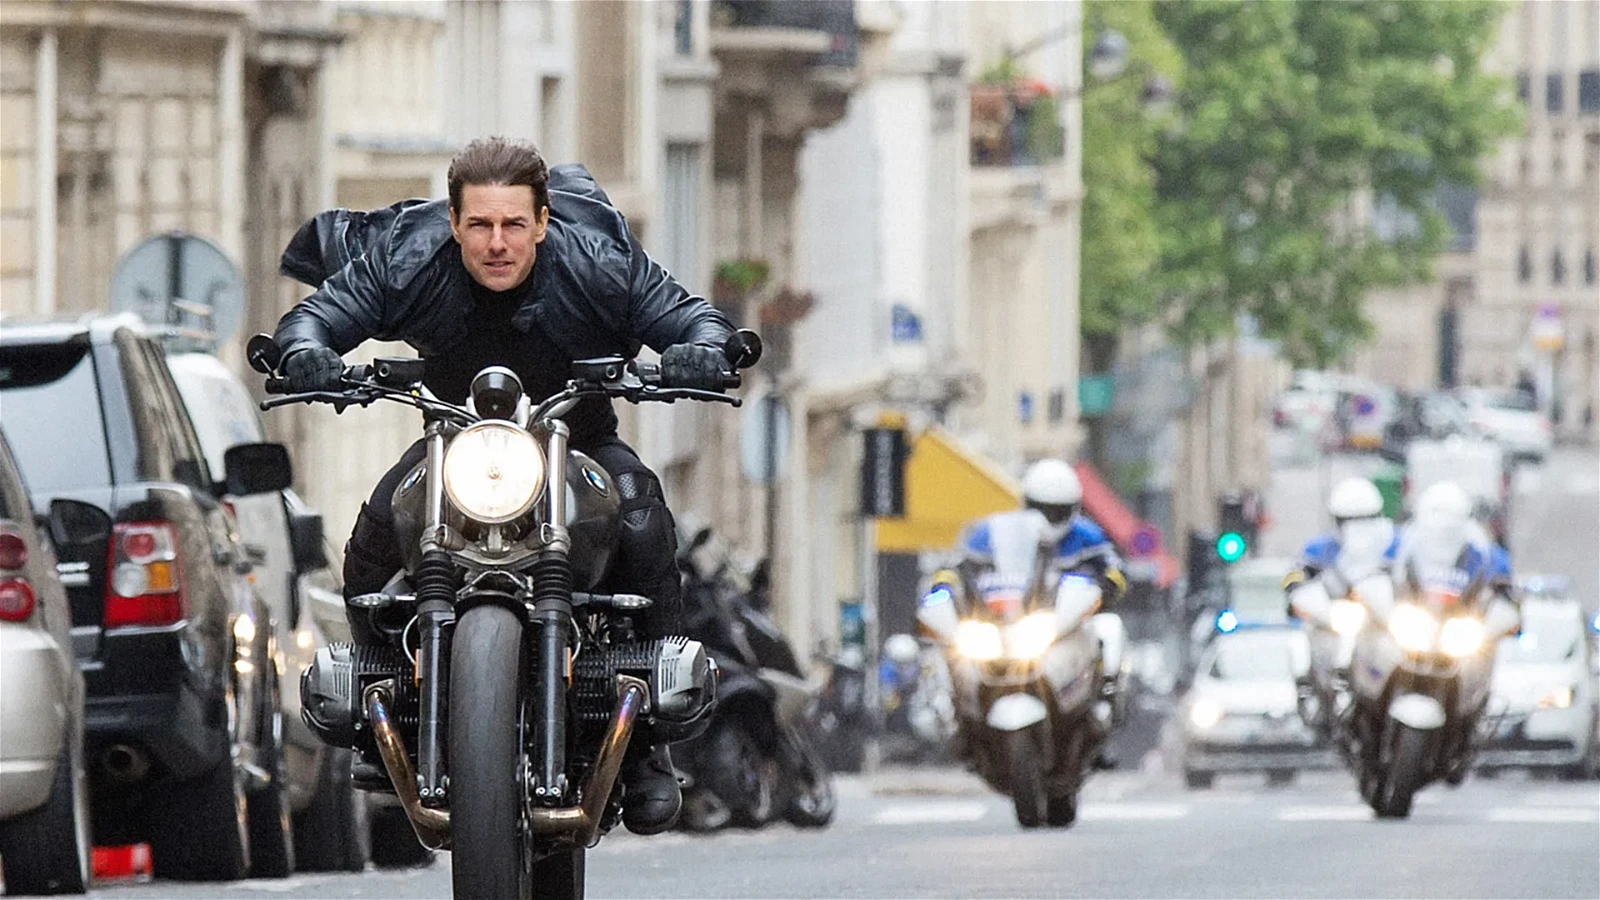 Tom Cruise in a still from the Mission: Impossible franchise